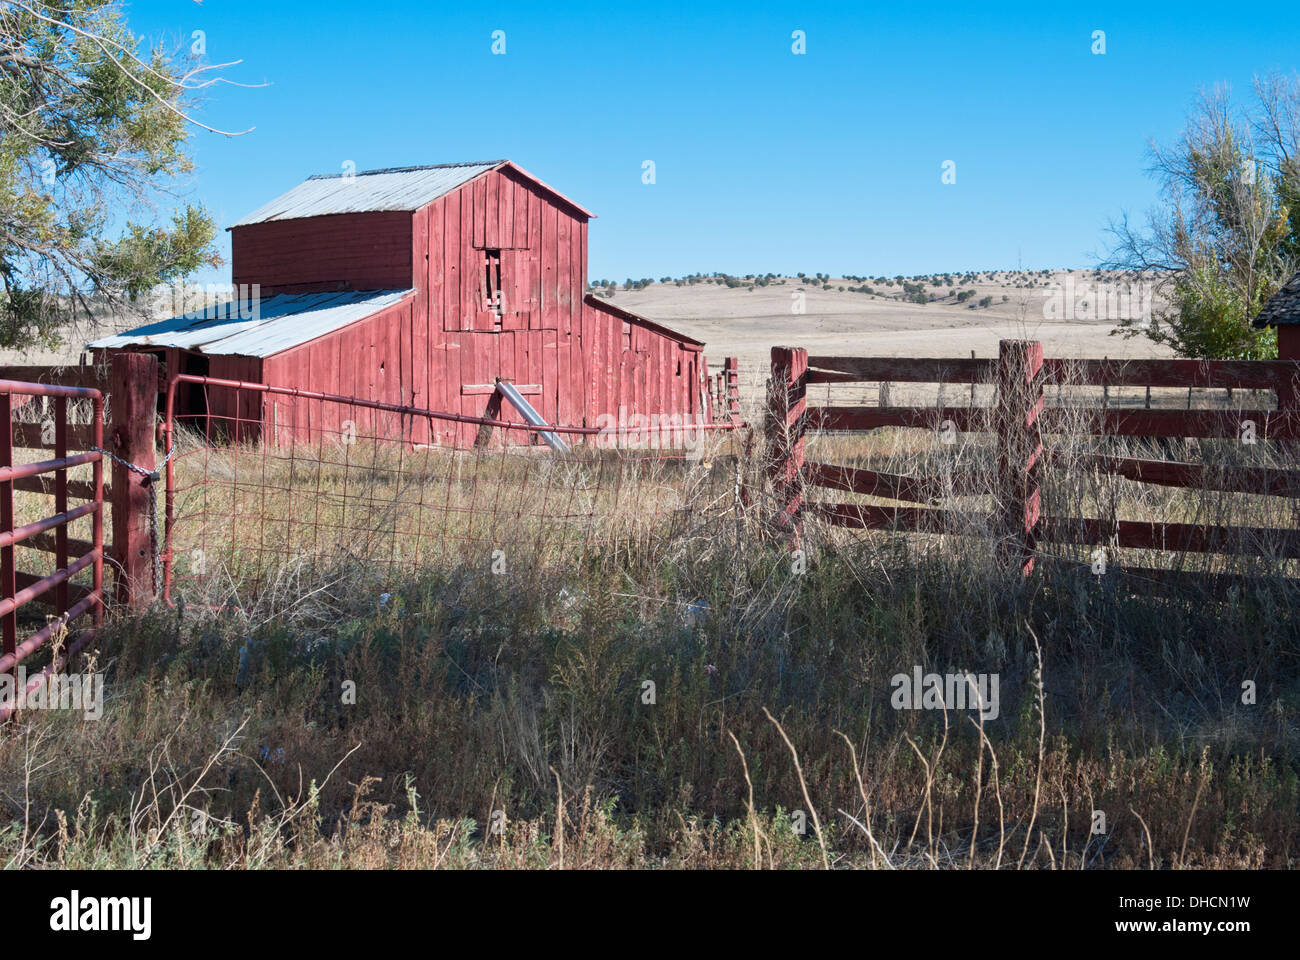 A red barn adds color to a side street in Capitan, New Mexico. Stock Photo